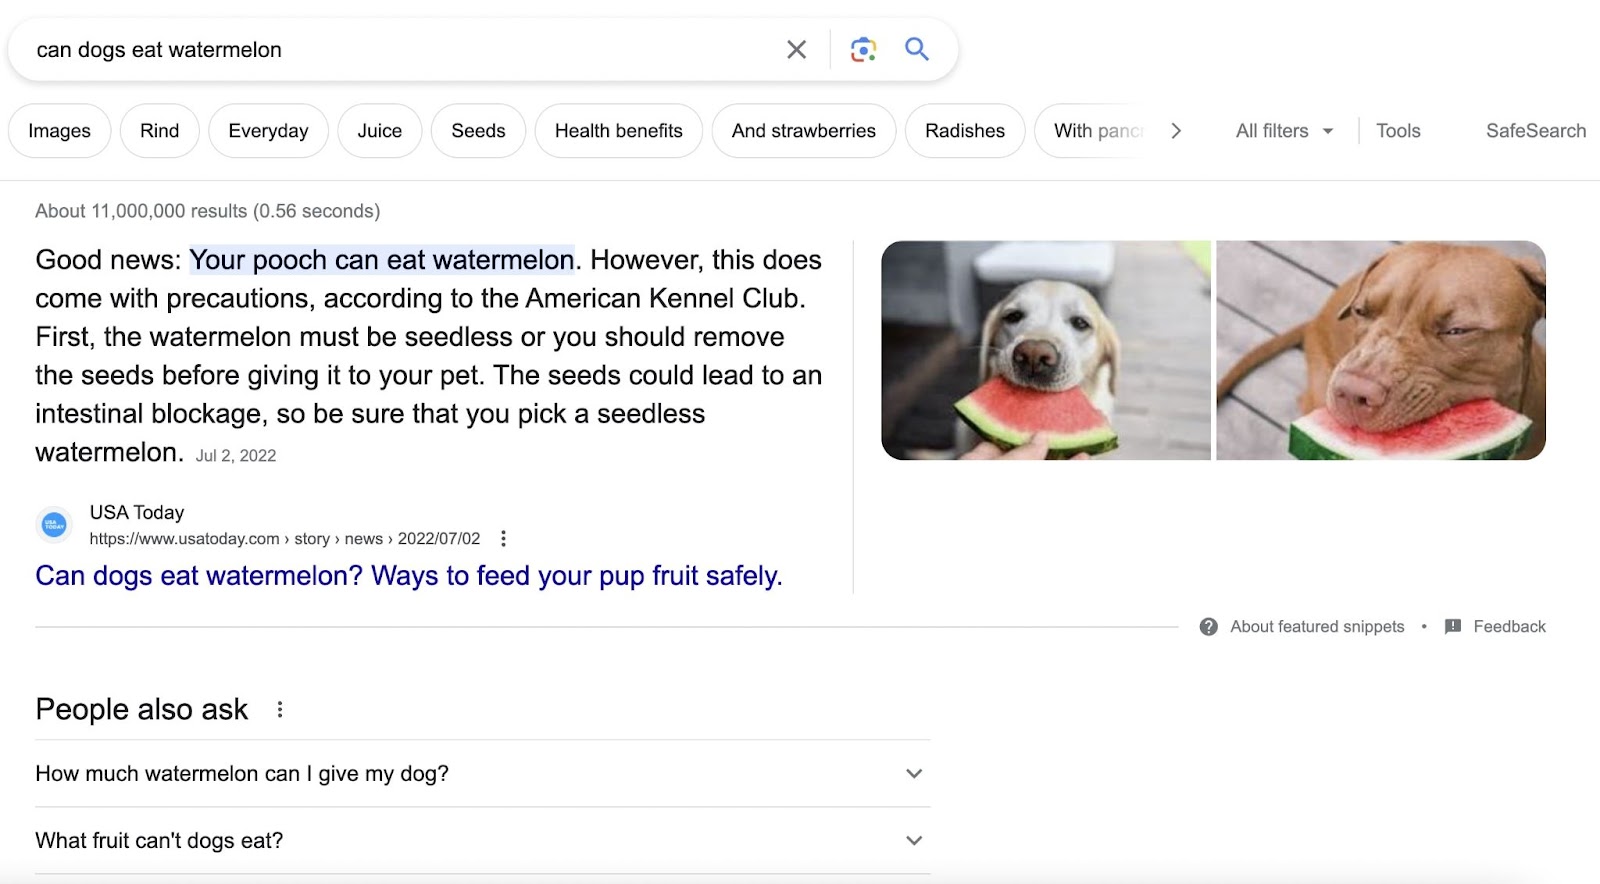 Google SERP preview for "can dogs eat watermelon"